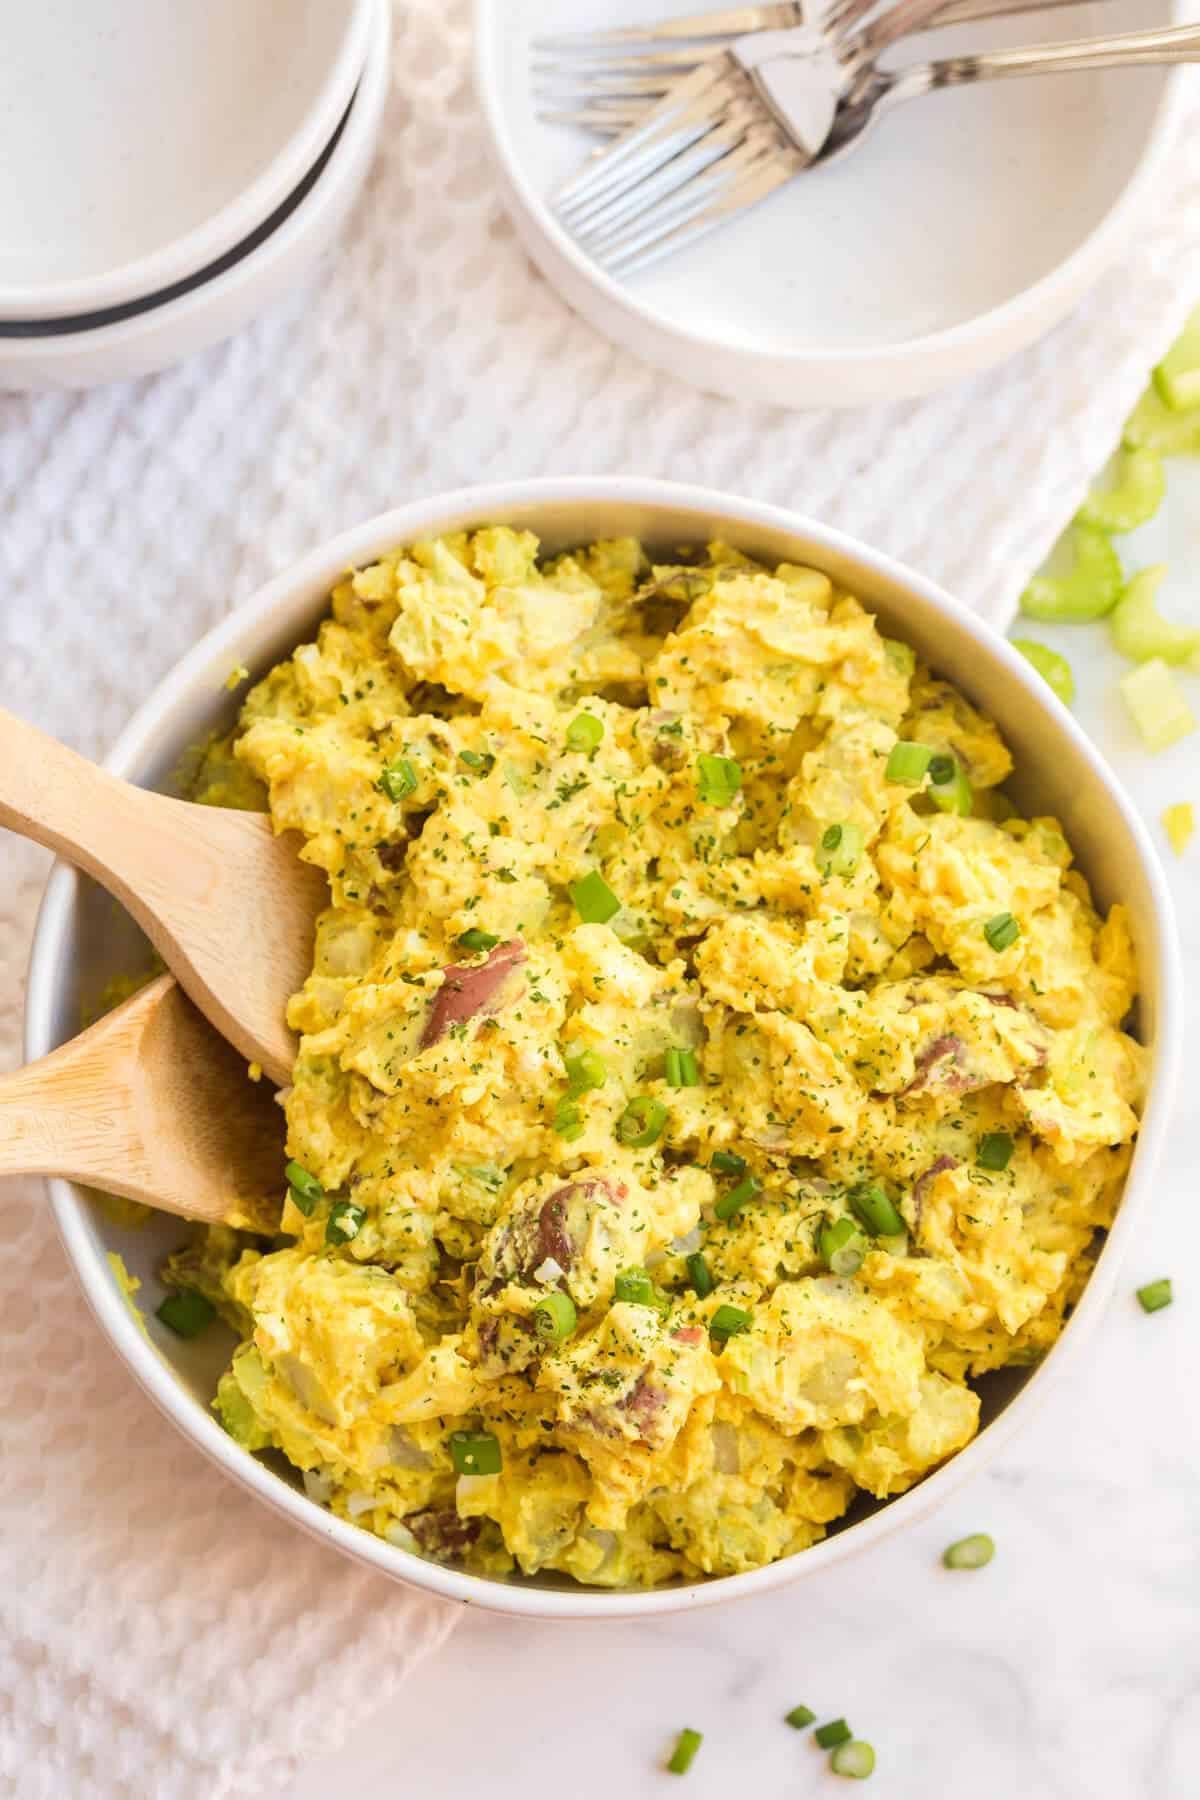 Curried Potato Salad in a bowl with two wooden spoons.